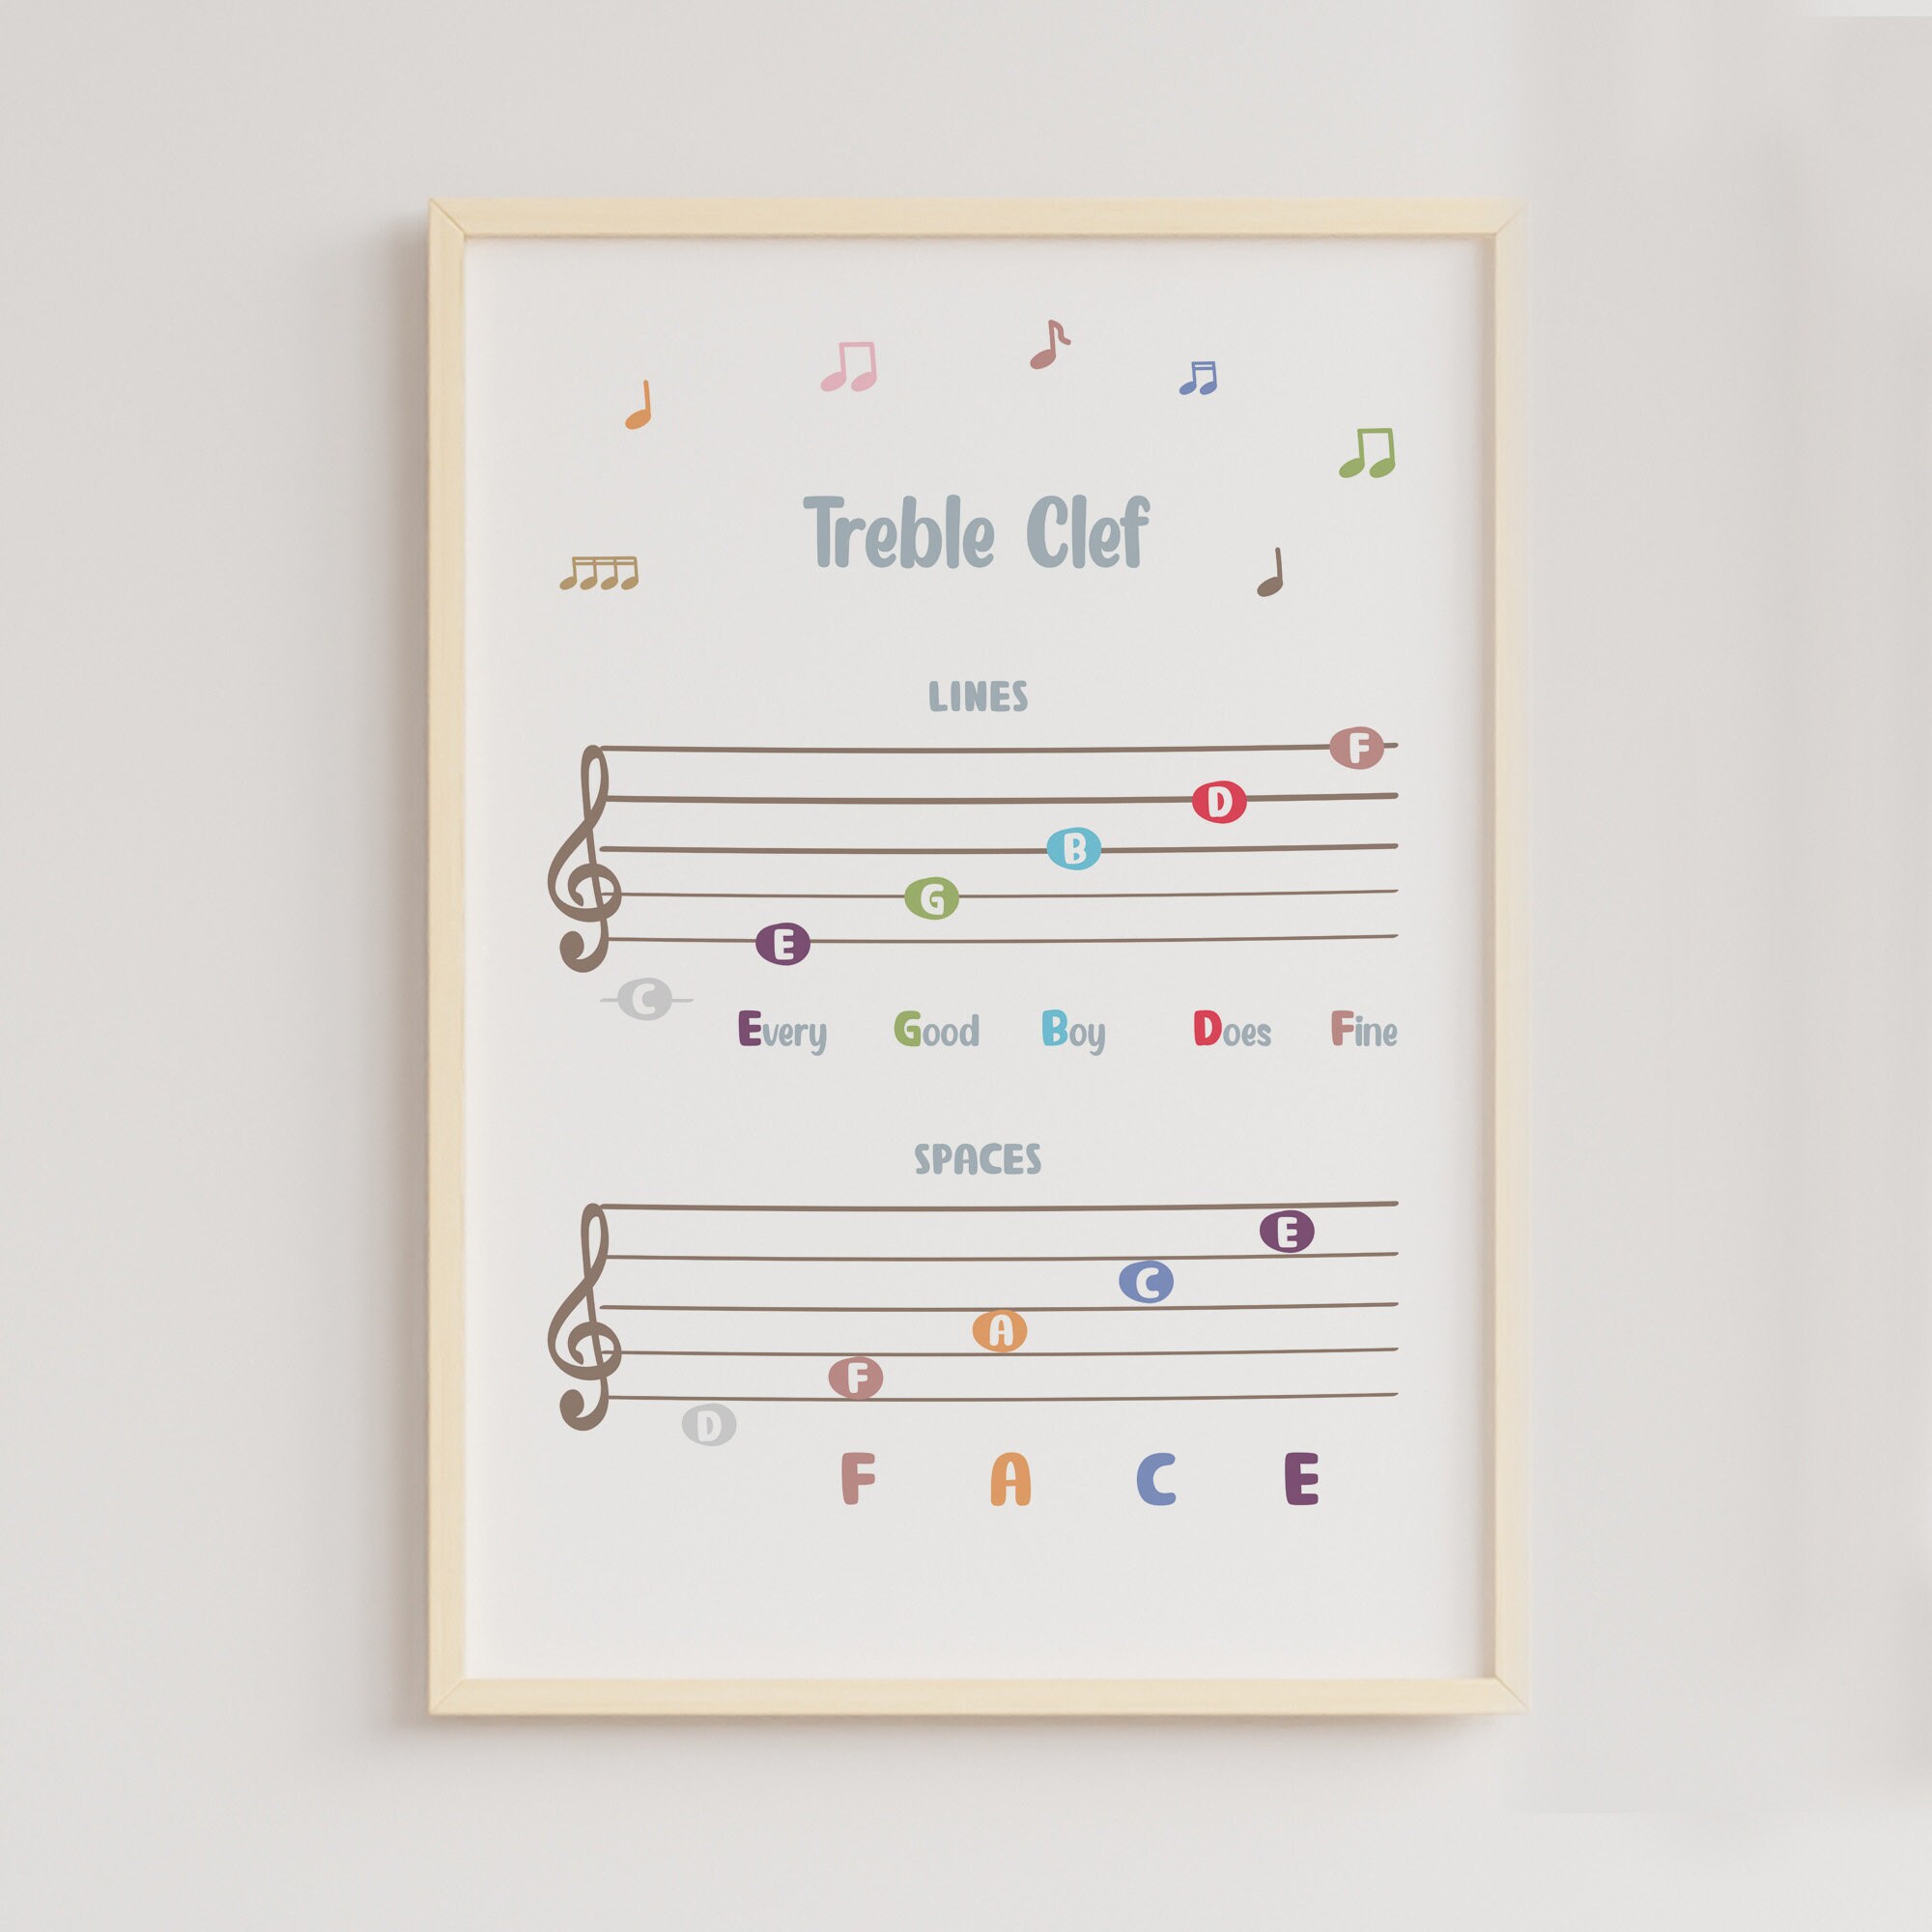 Notes To Self: Wall Art Kit – Color In My Piano